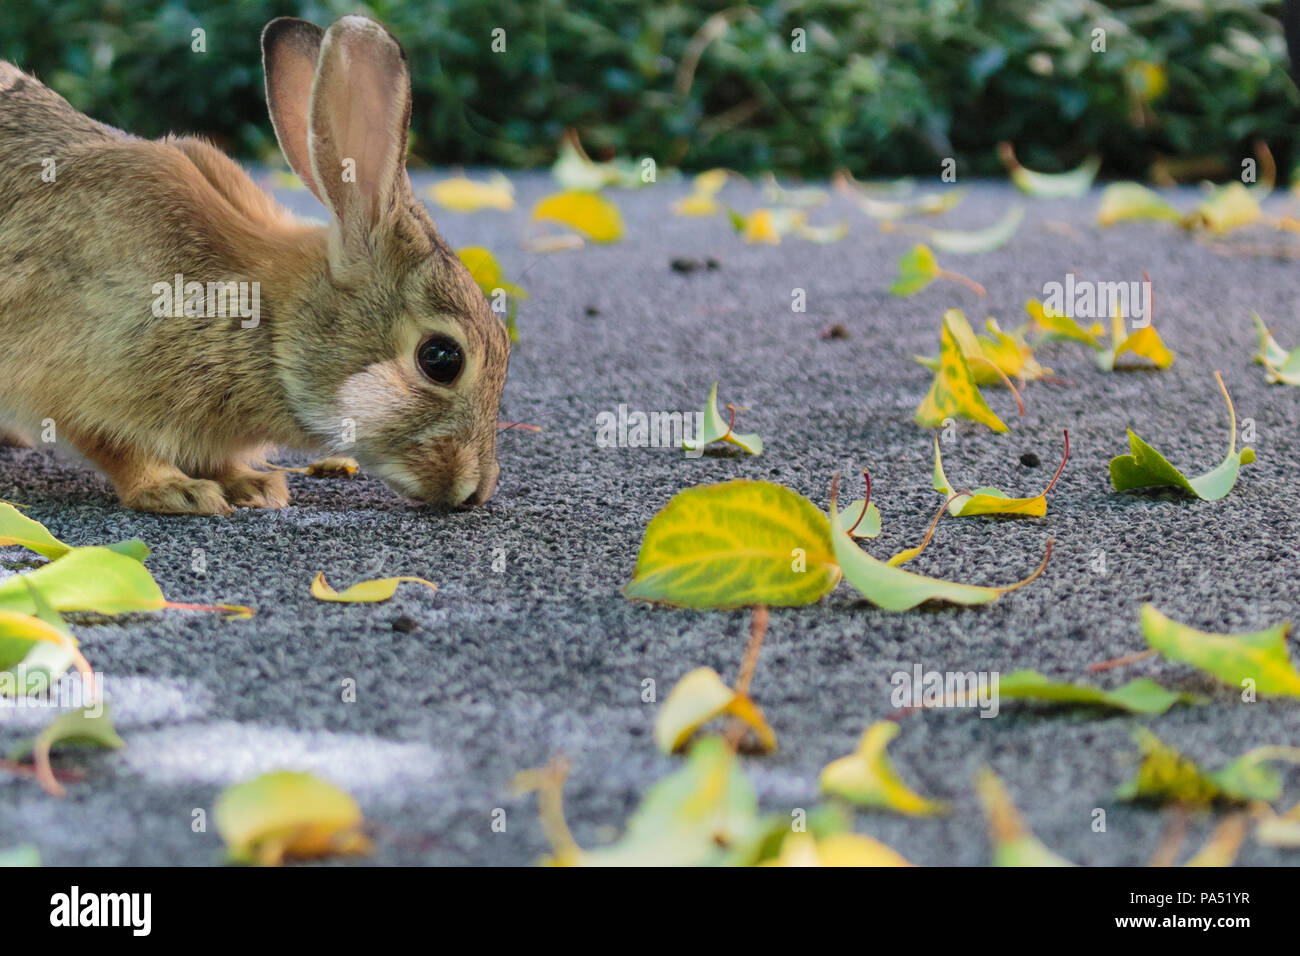 A cute little bunny sniffing the ground, looking for a snack. Stock Photo